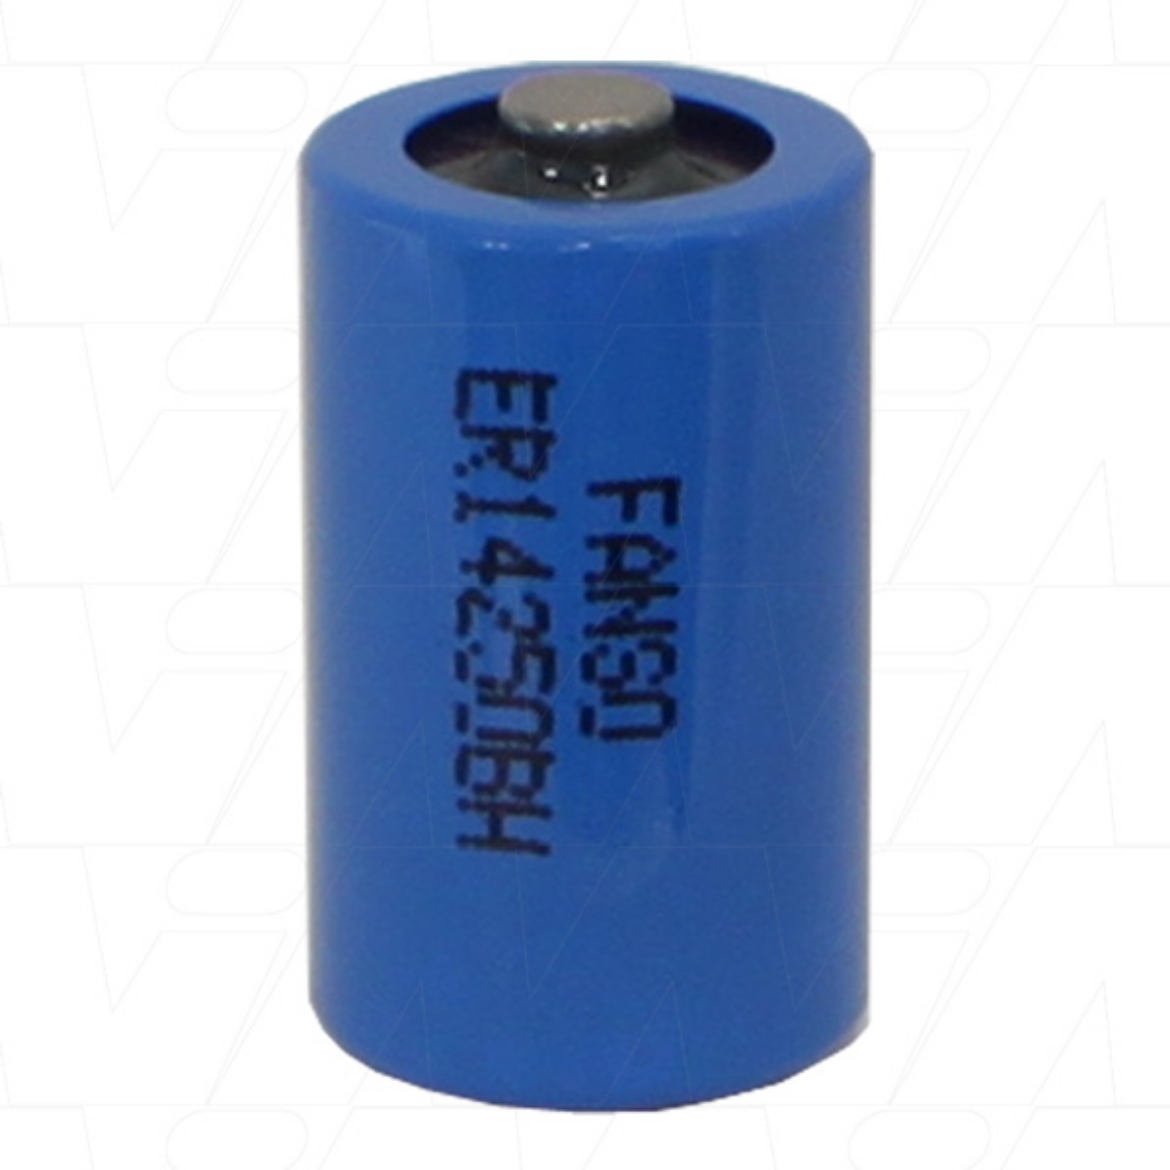 Picture of FANSO 1/2AA SIZE 3.6V 1200MAH LITHIUM THIONYL CHLORIDE BATTERY - BOBBIN TYPE (PULSE)